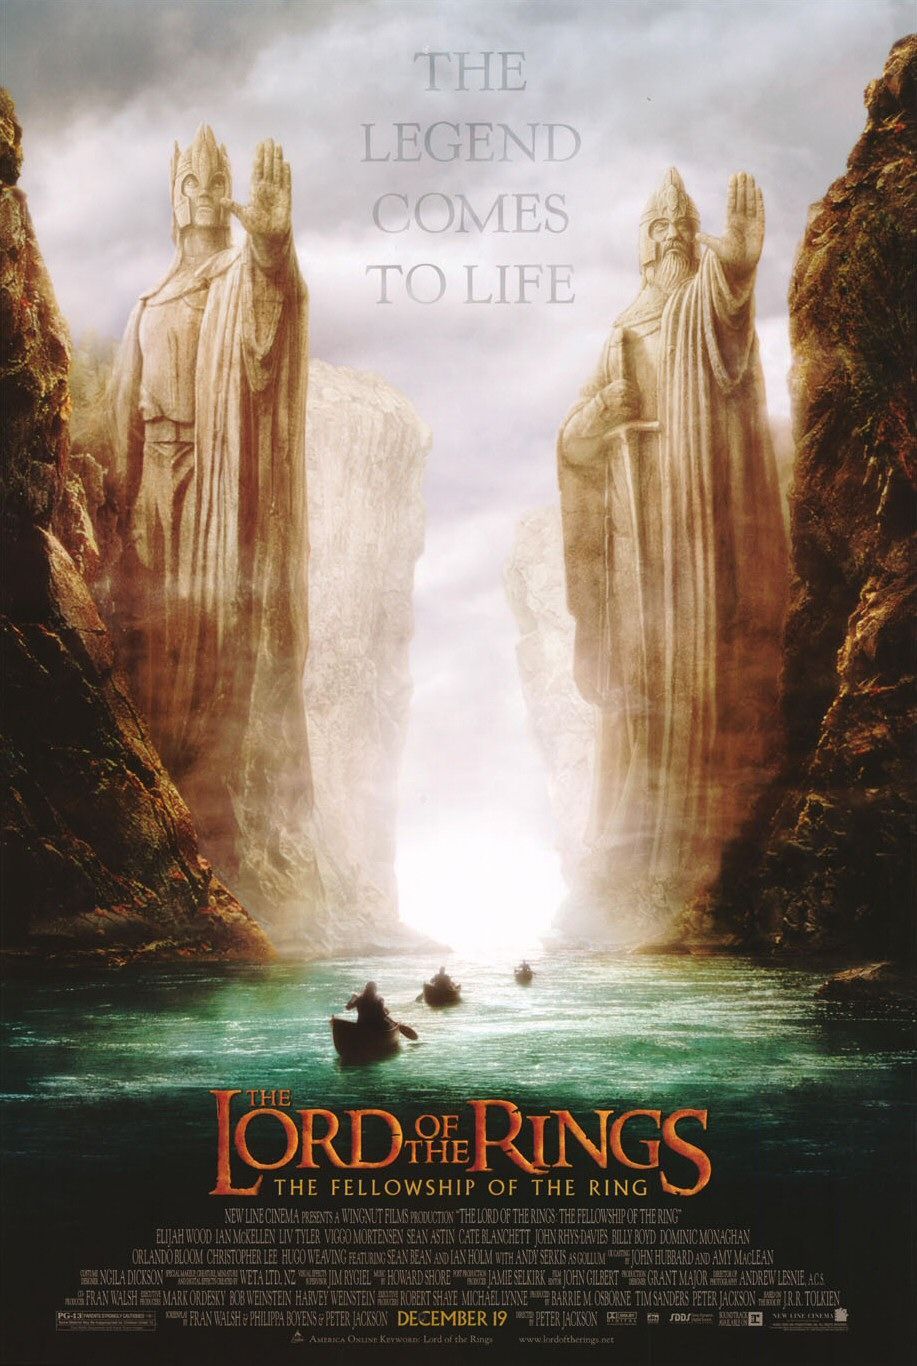 The Lord of the Rings: The Fellowship of the Ring - Movies Maniac